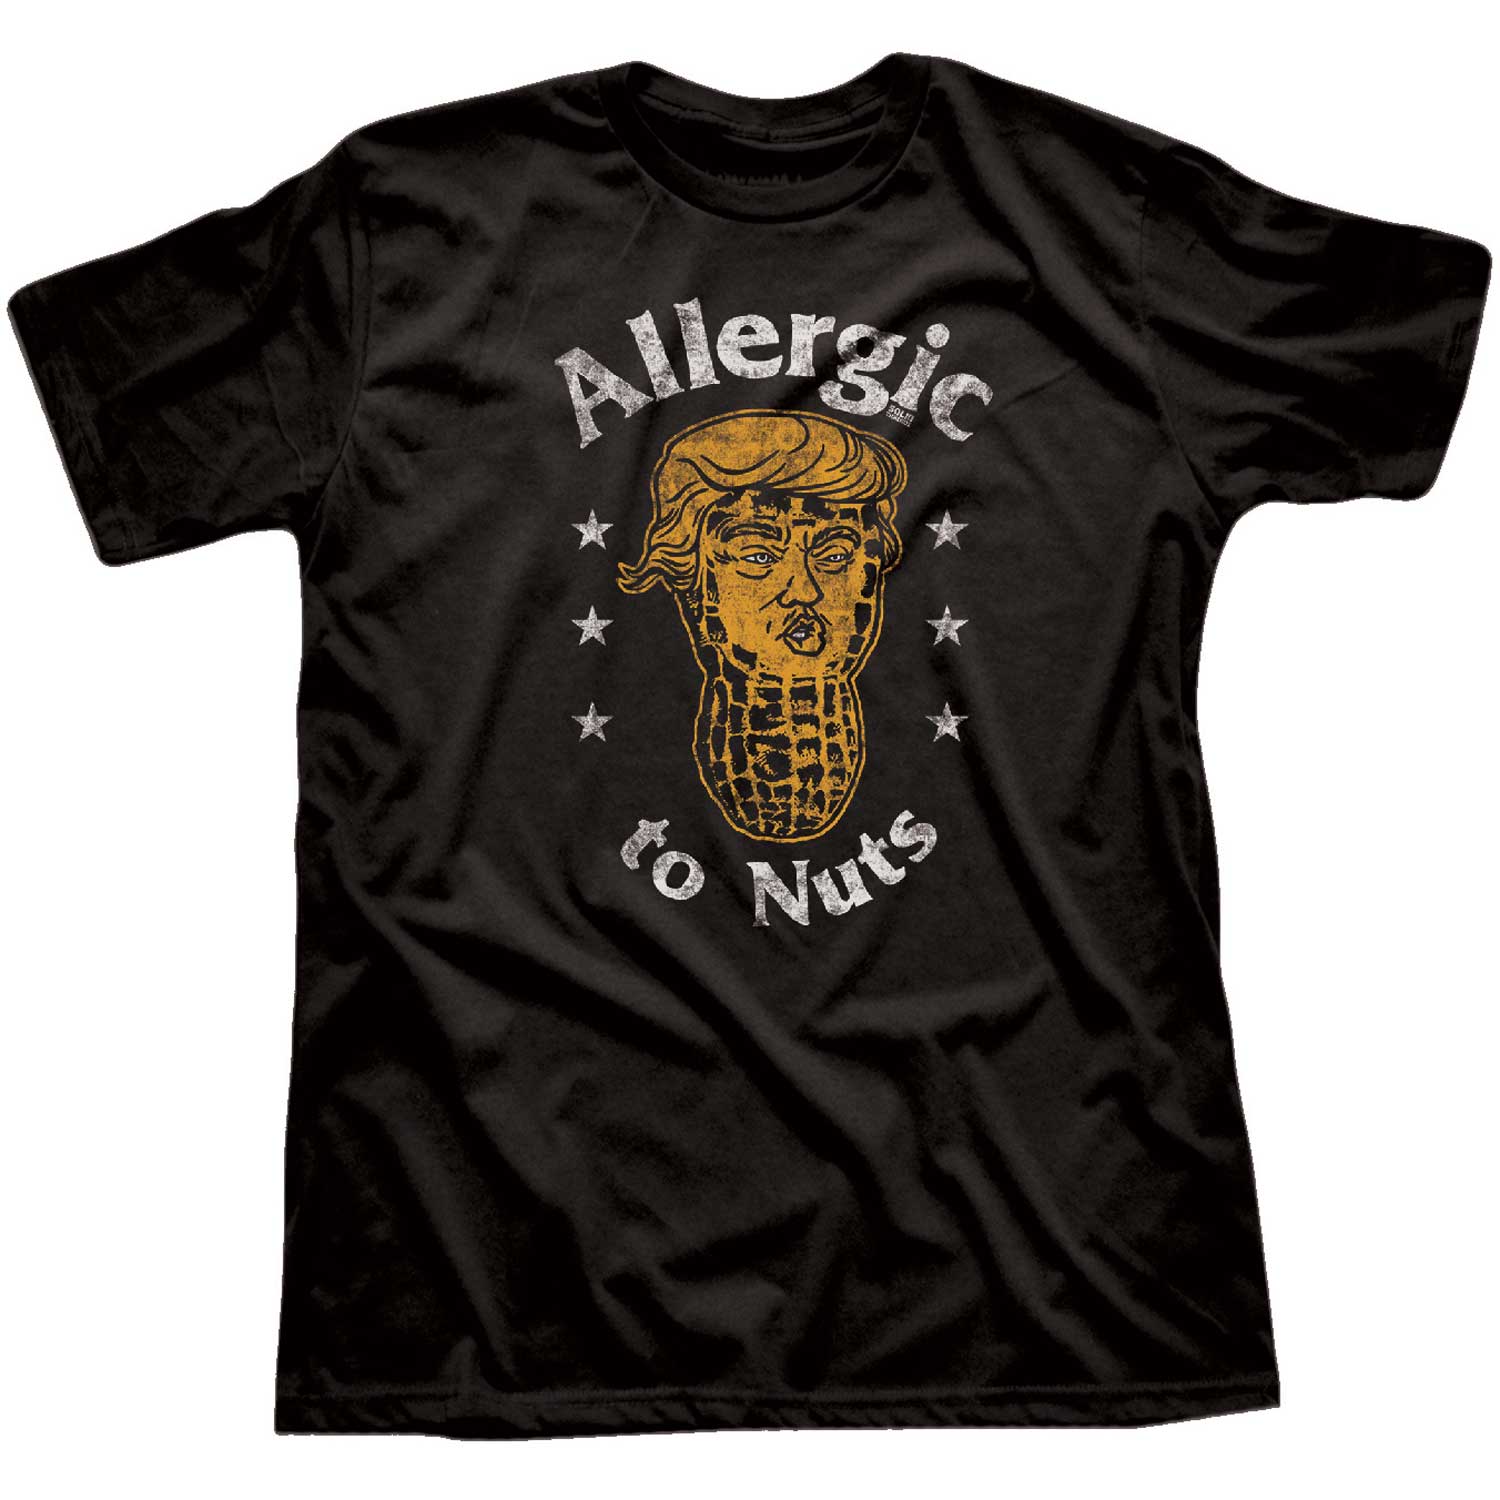 Men's Allergic To Nuts Vintage Graphic T-Shirt | Funny Anti Trump Blackwash Tee | Solid Threads